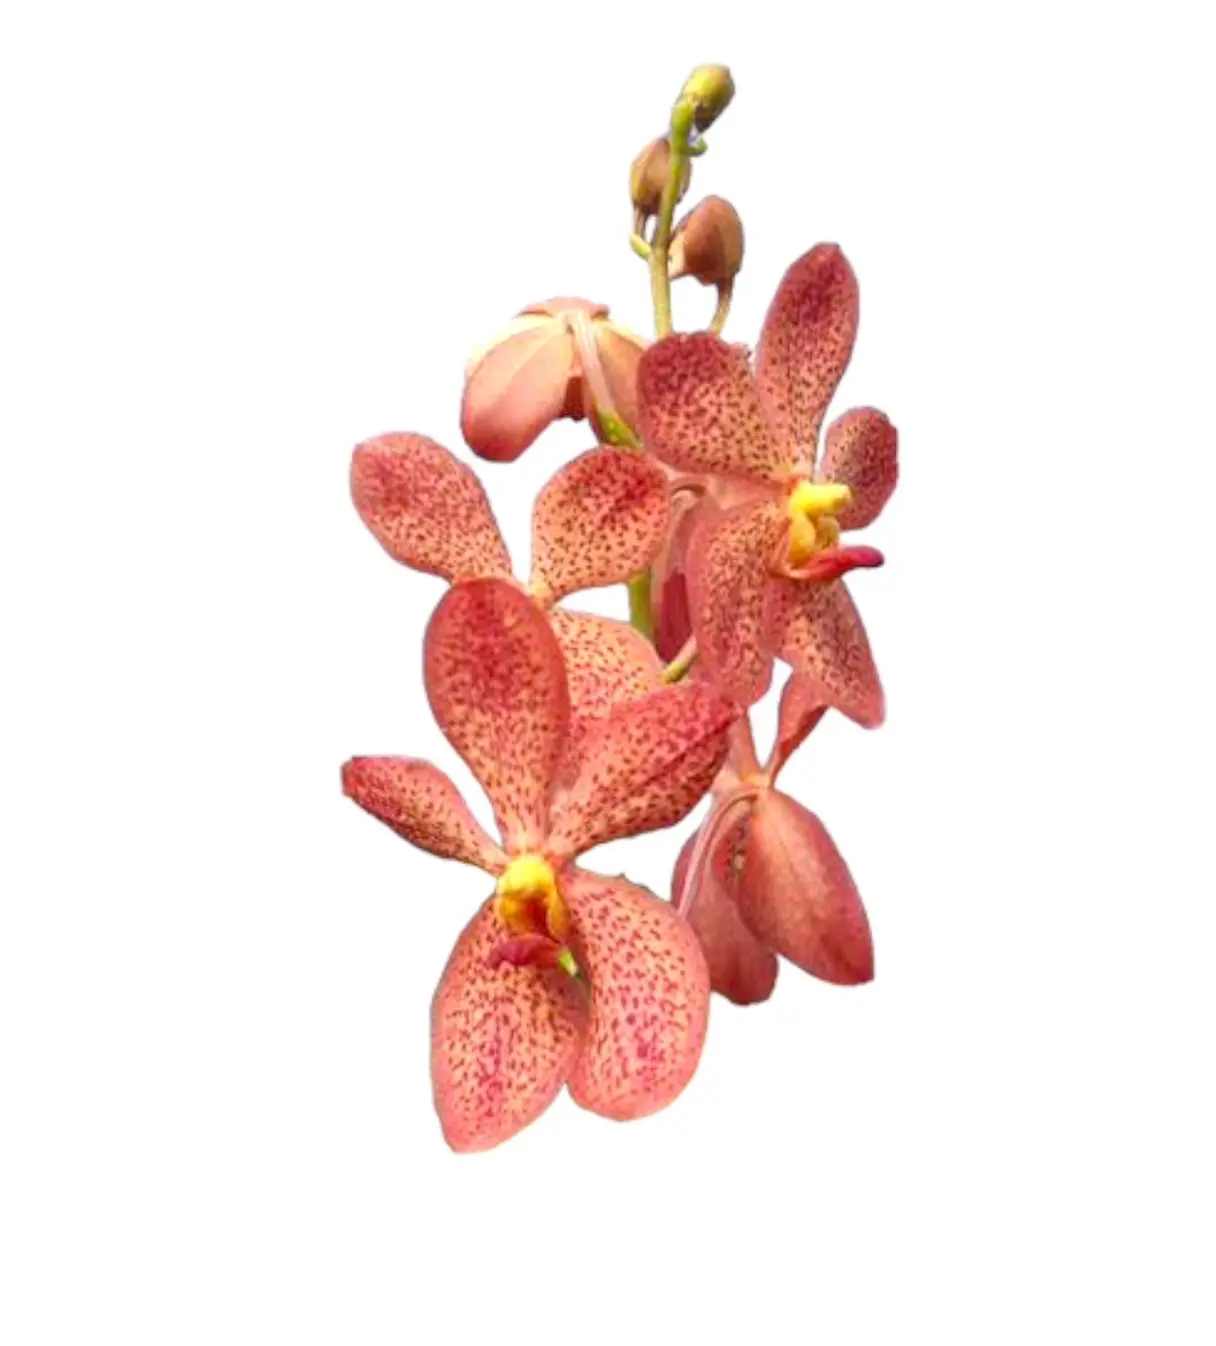 Red Mocara Fresh Cut Orchid Flower To Decorate The House Or Place For Beauty And Shady Used To Decorate The Home And Garden